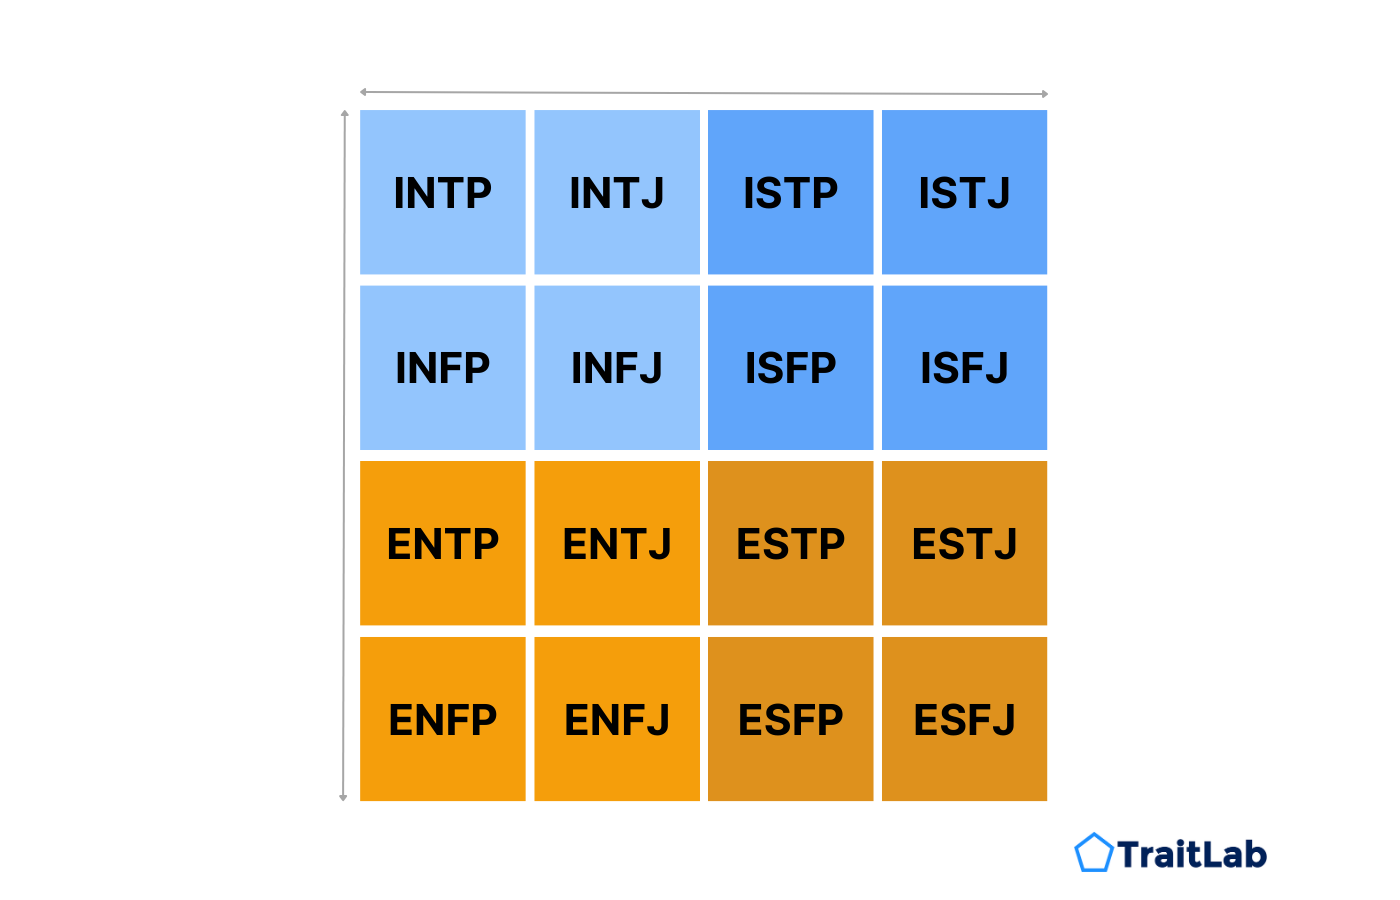 An example of a 16 personality types result